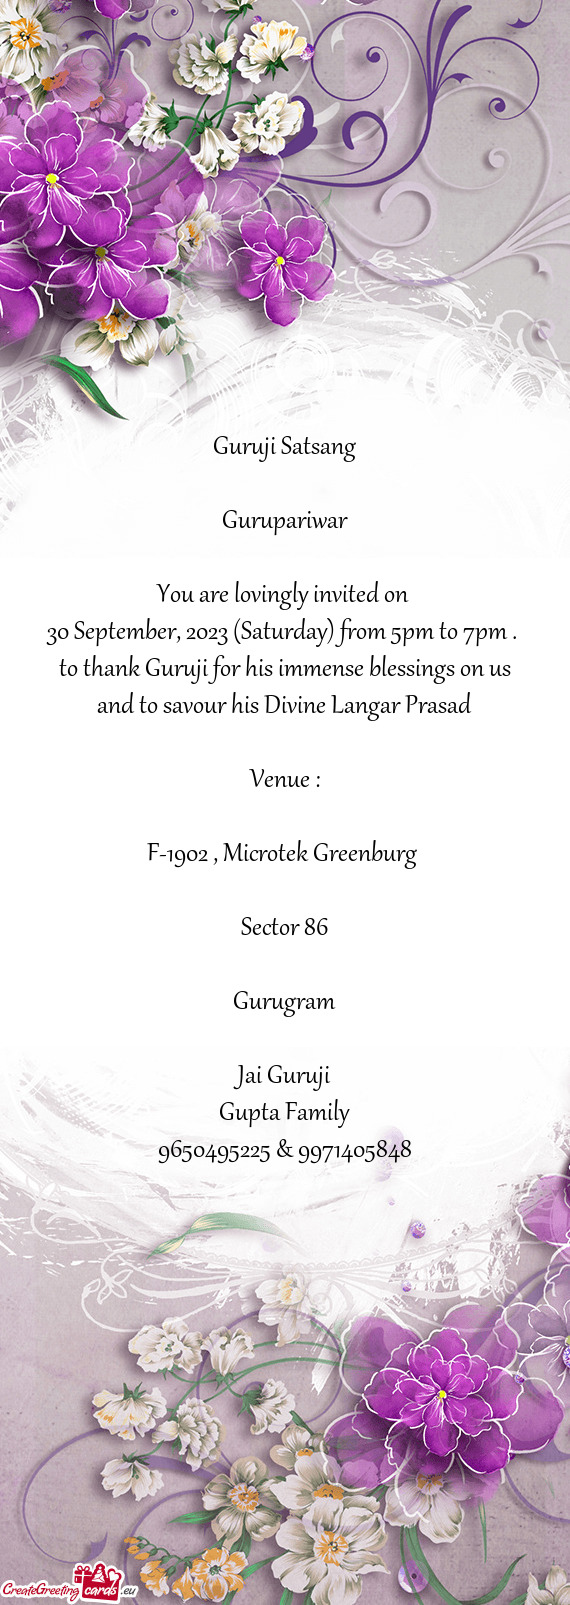 30 September, 2023 (Saturday) from 5pm to 7pm